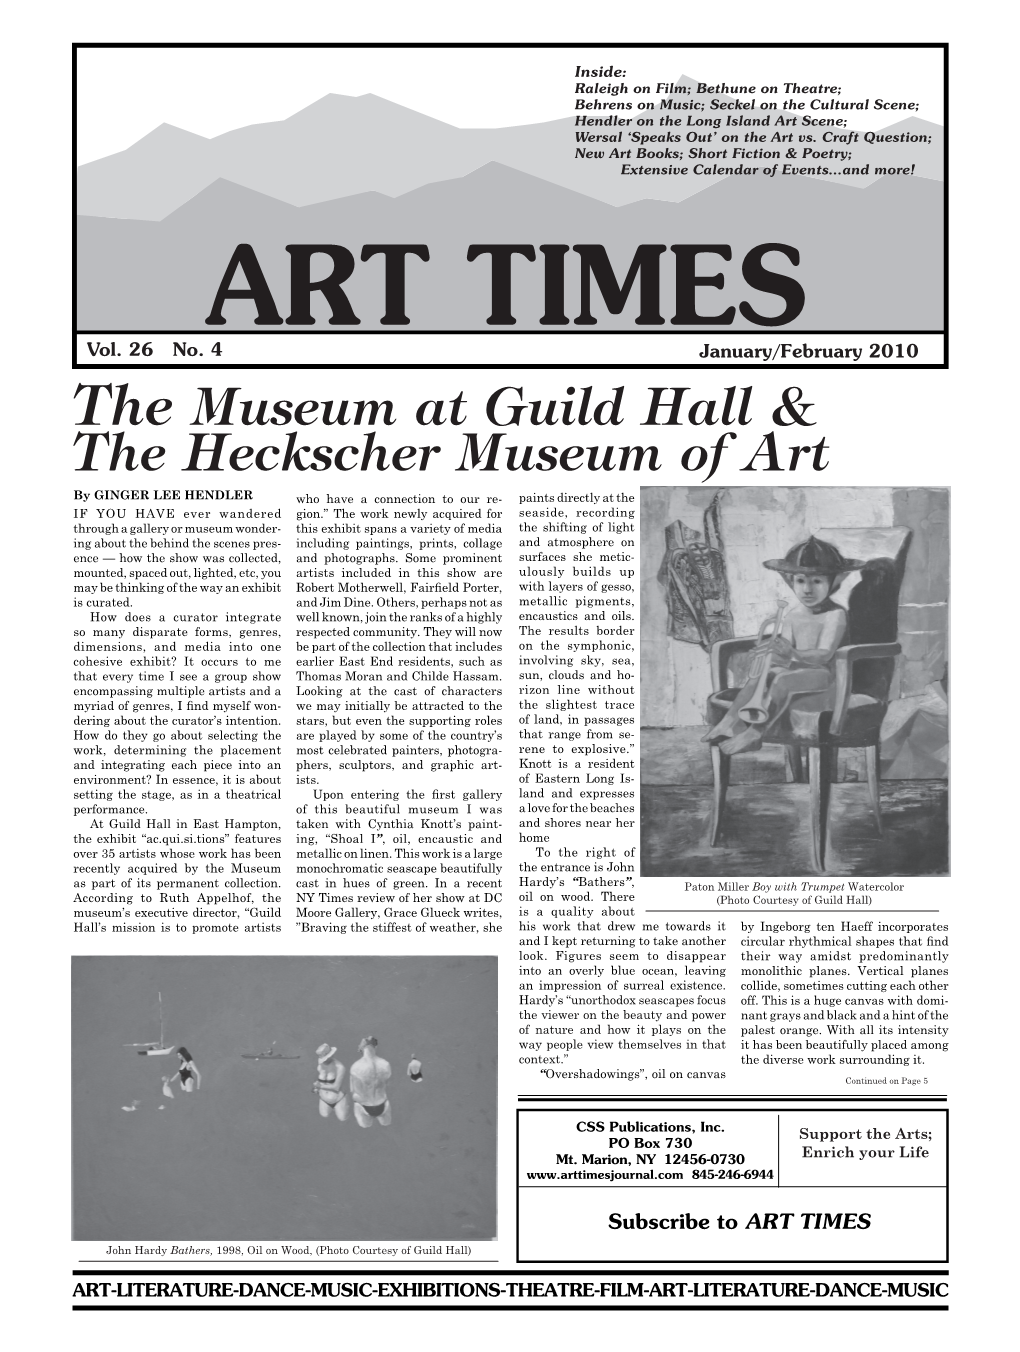 The Museum at Guild Hall & the Heckscher Museum Of